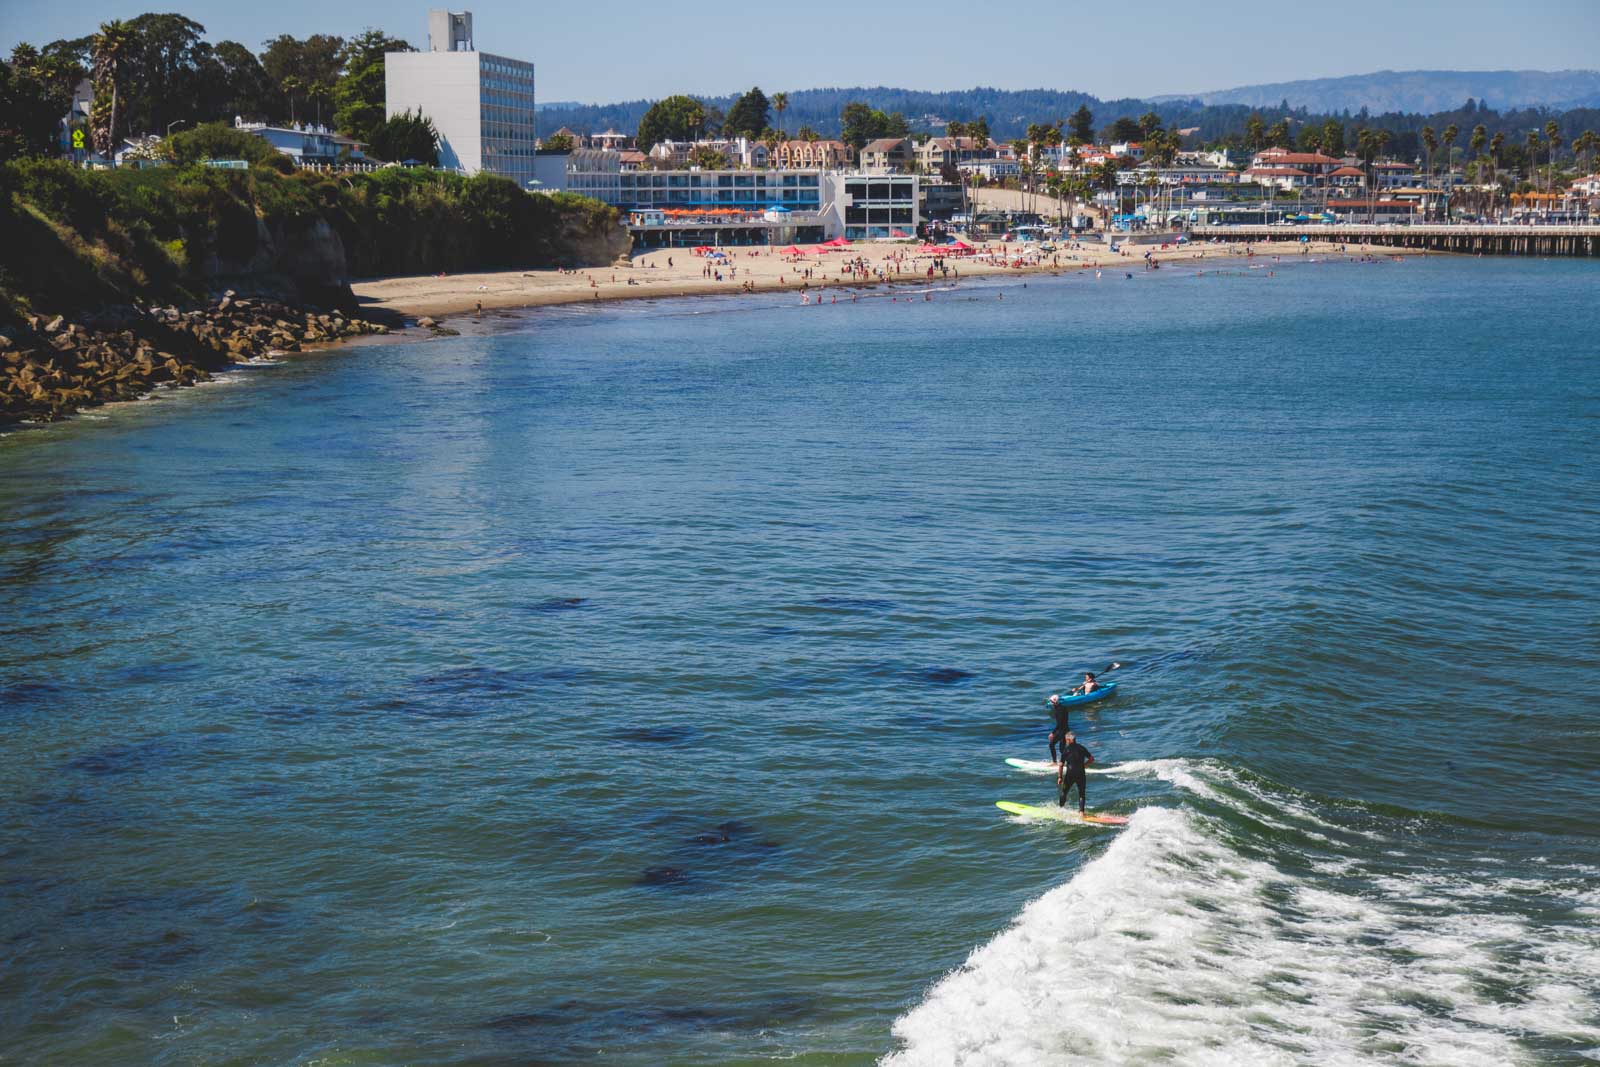 Surfers on the ocean with a kayaker besides a busy Cowell Beach in Santa Cruz.